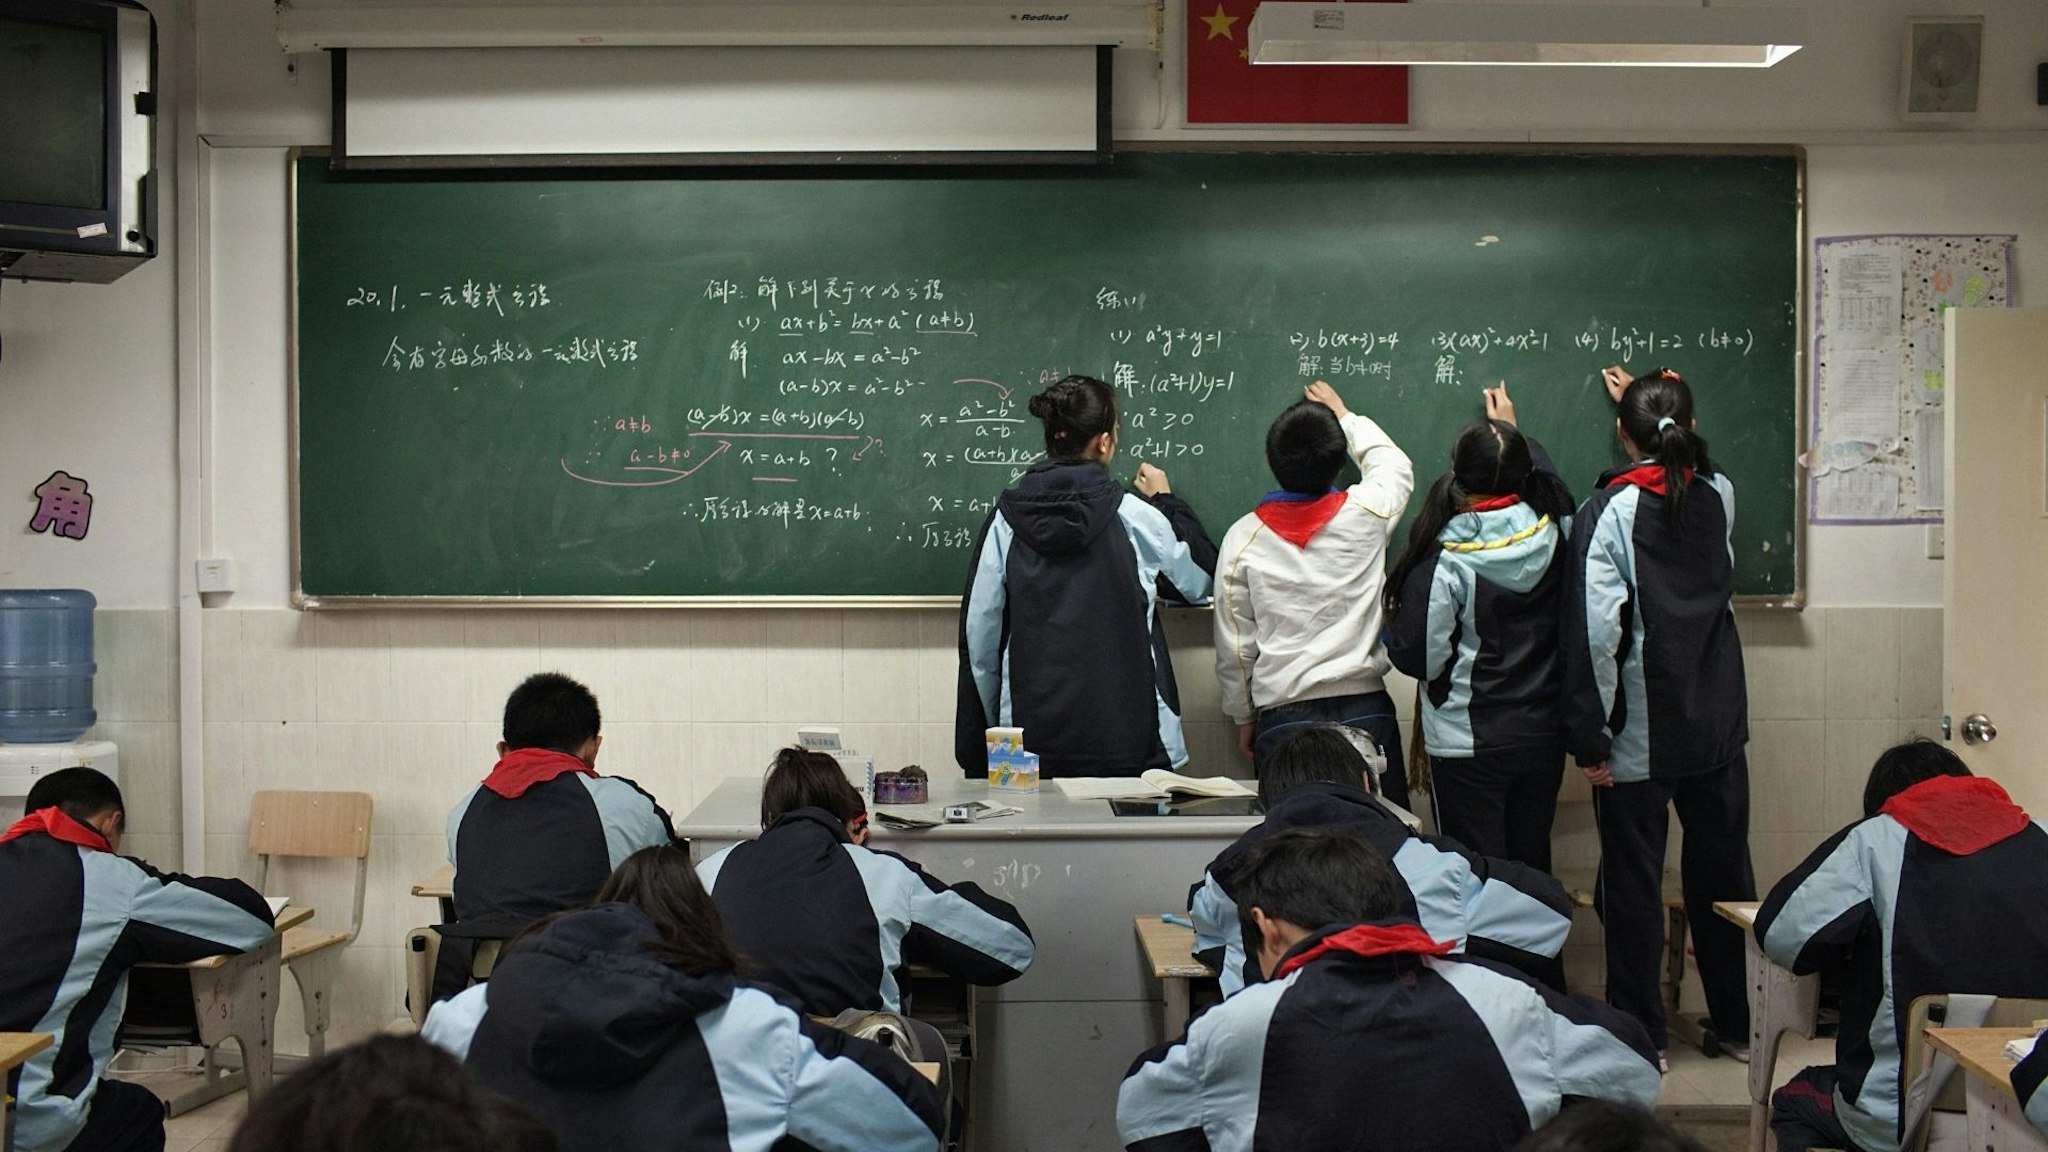 SHANGHAI, CHINA - FEBRUARY 28: A math class in Shanghai Jiao Tong University No.2 Affiliated Middle School February 28, 2011 in Minhang district in Shanghai, China. (Photo by David Hogsholt/Getty Images)